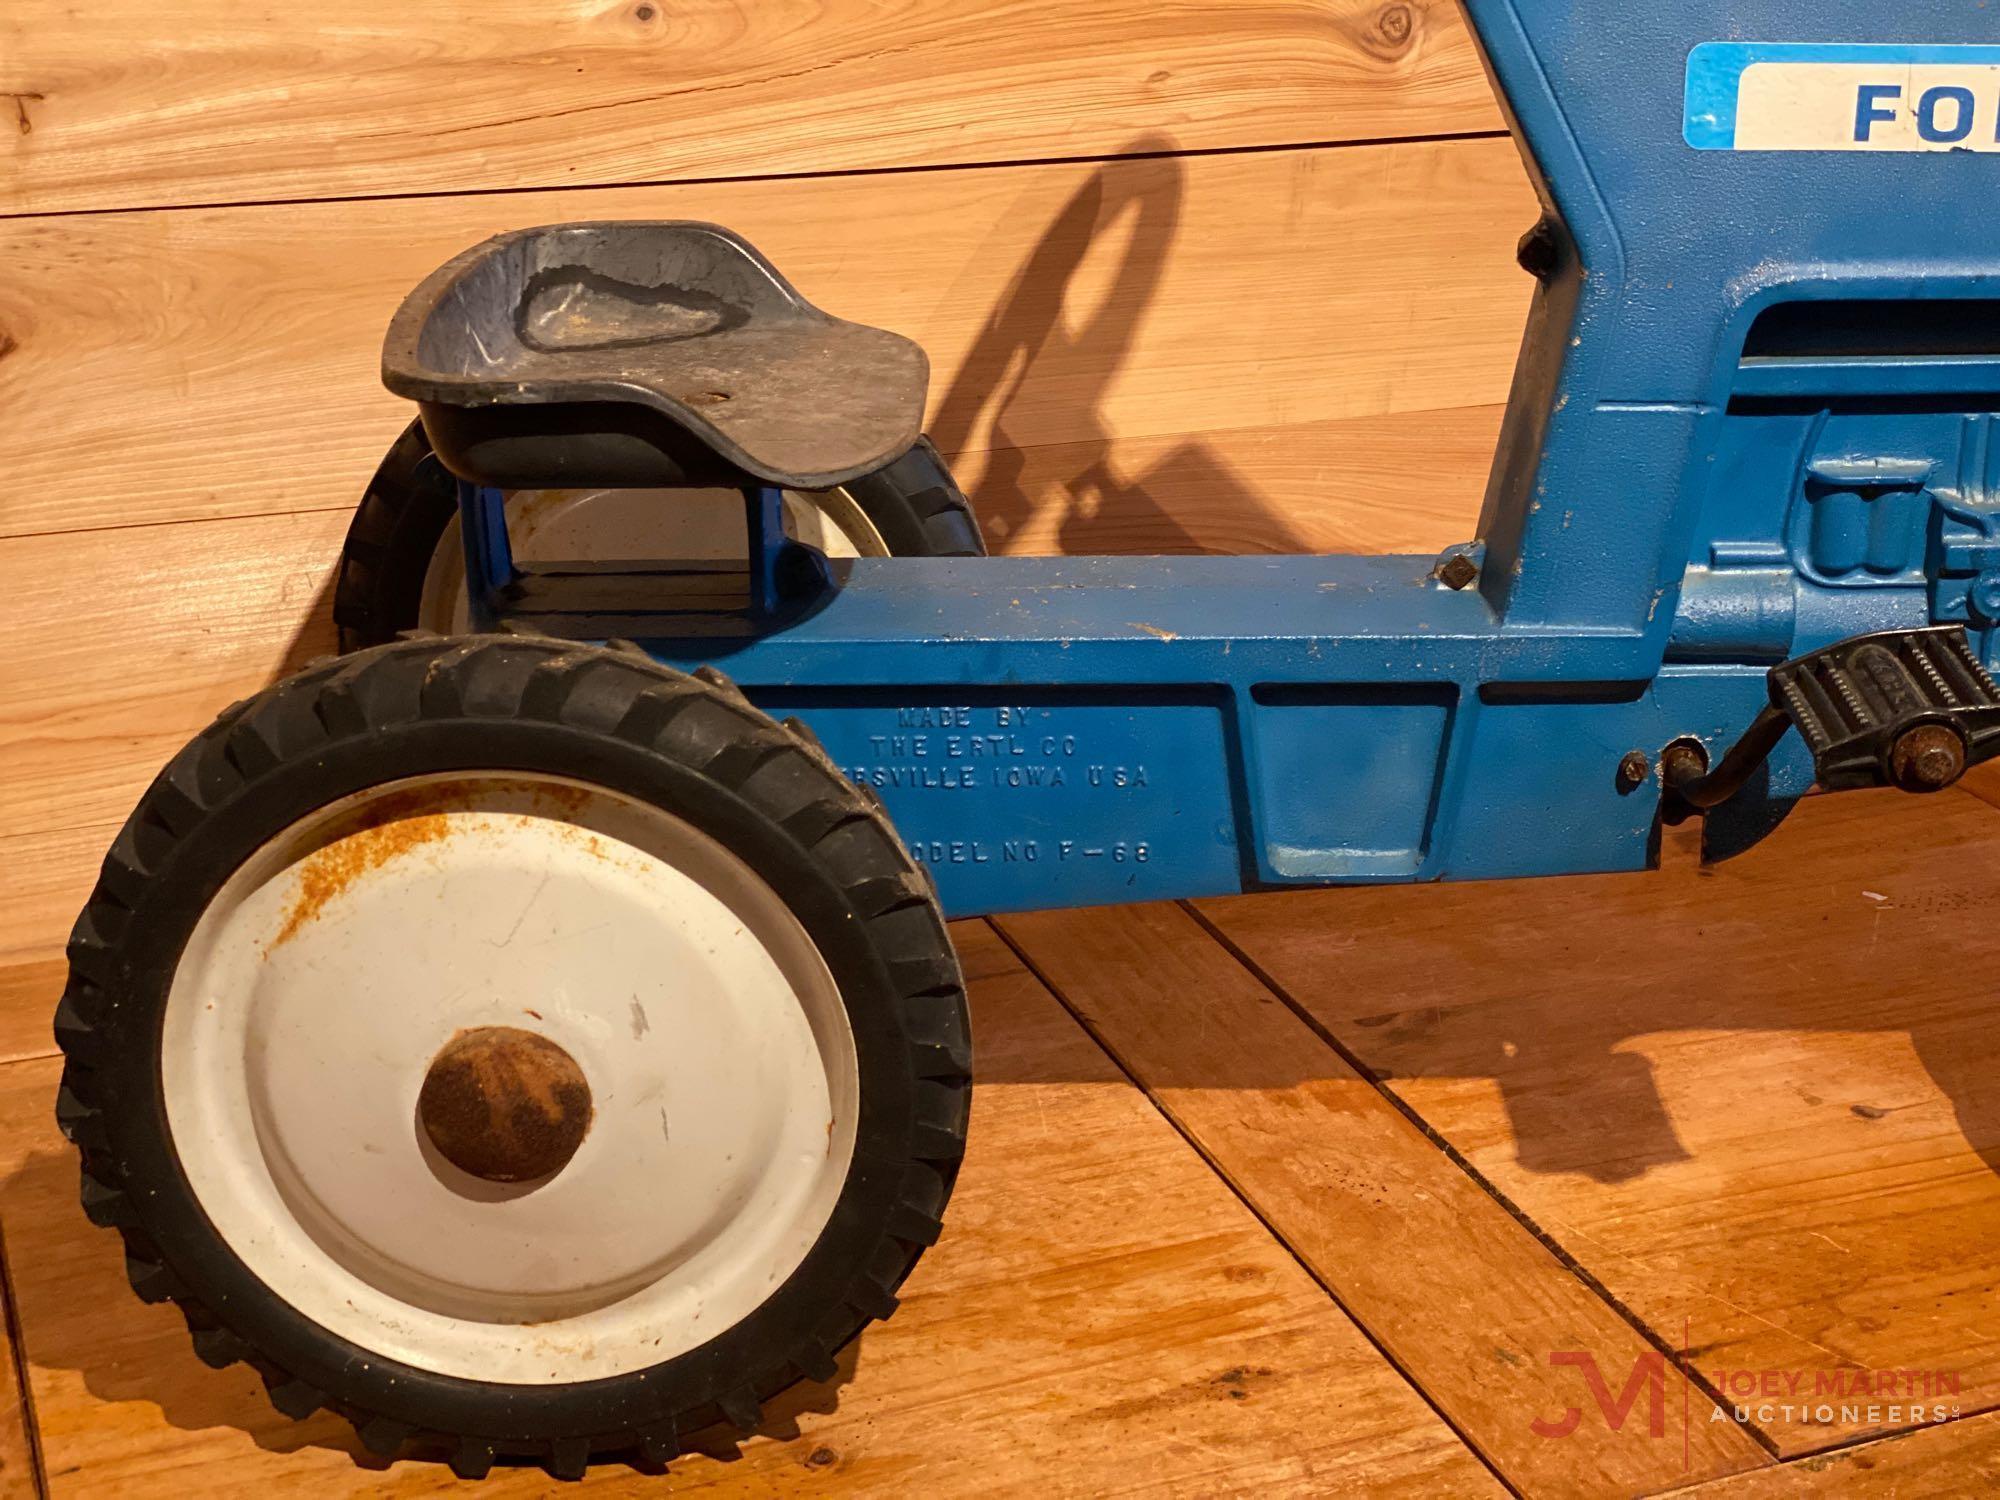 FORD TW-20 PEDAL TRACTOR, MODEL F-68, TRICYCLE